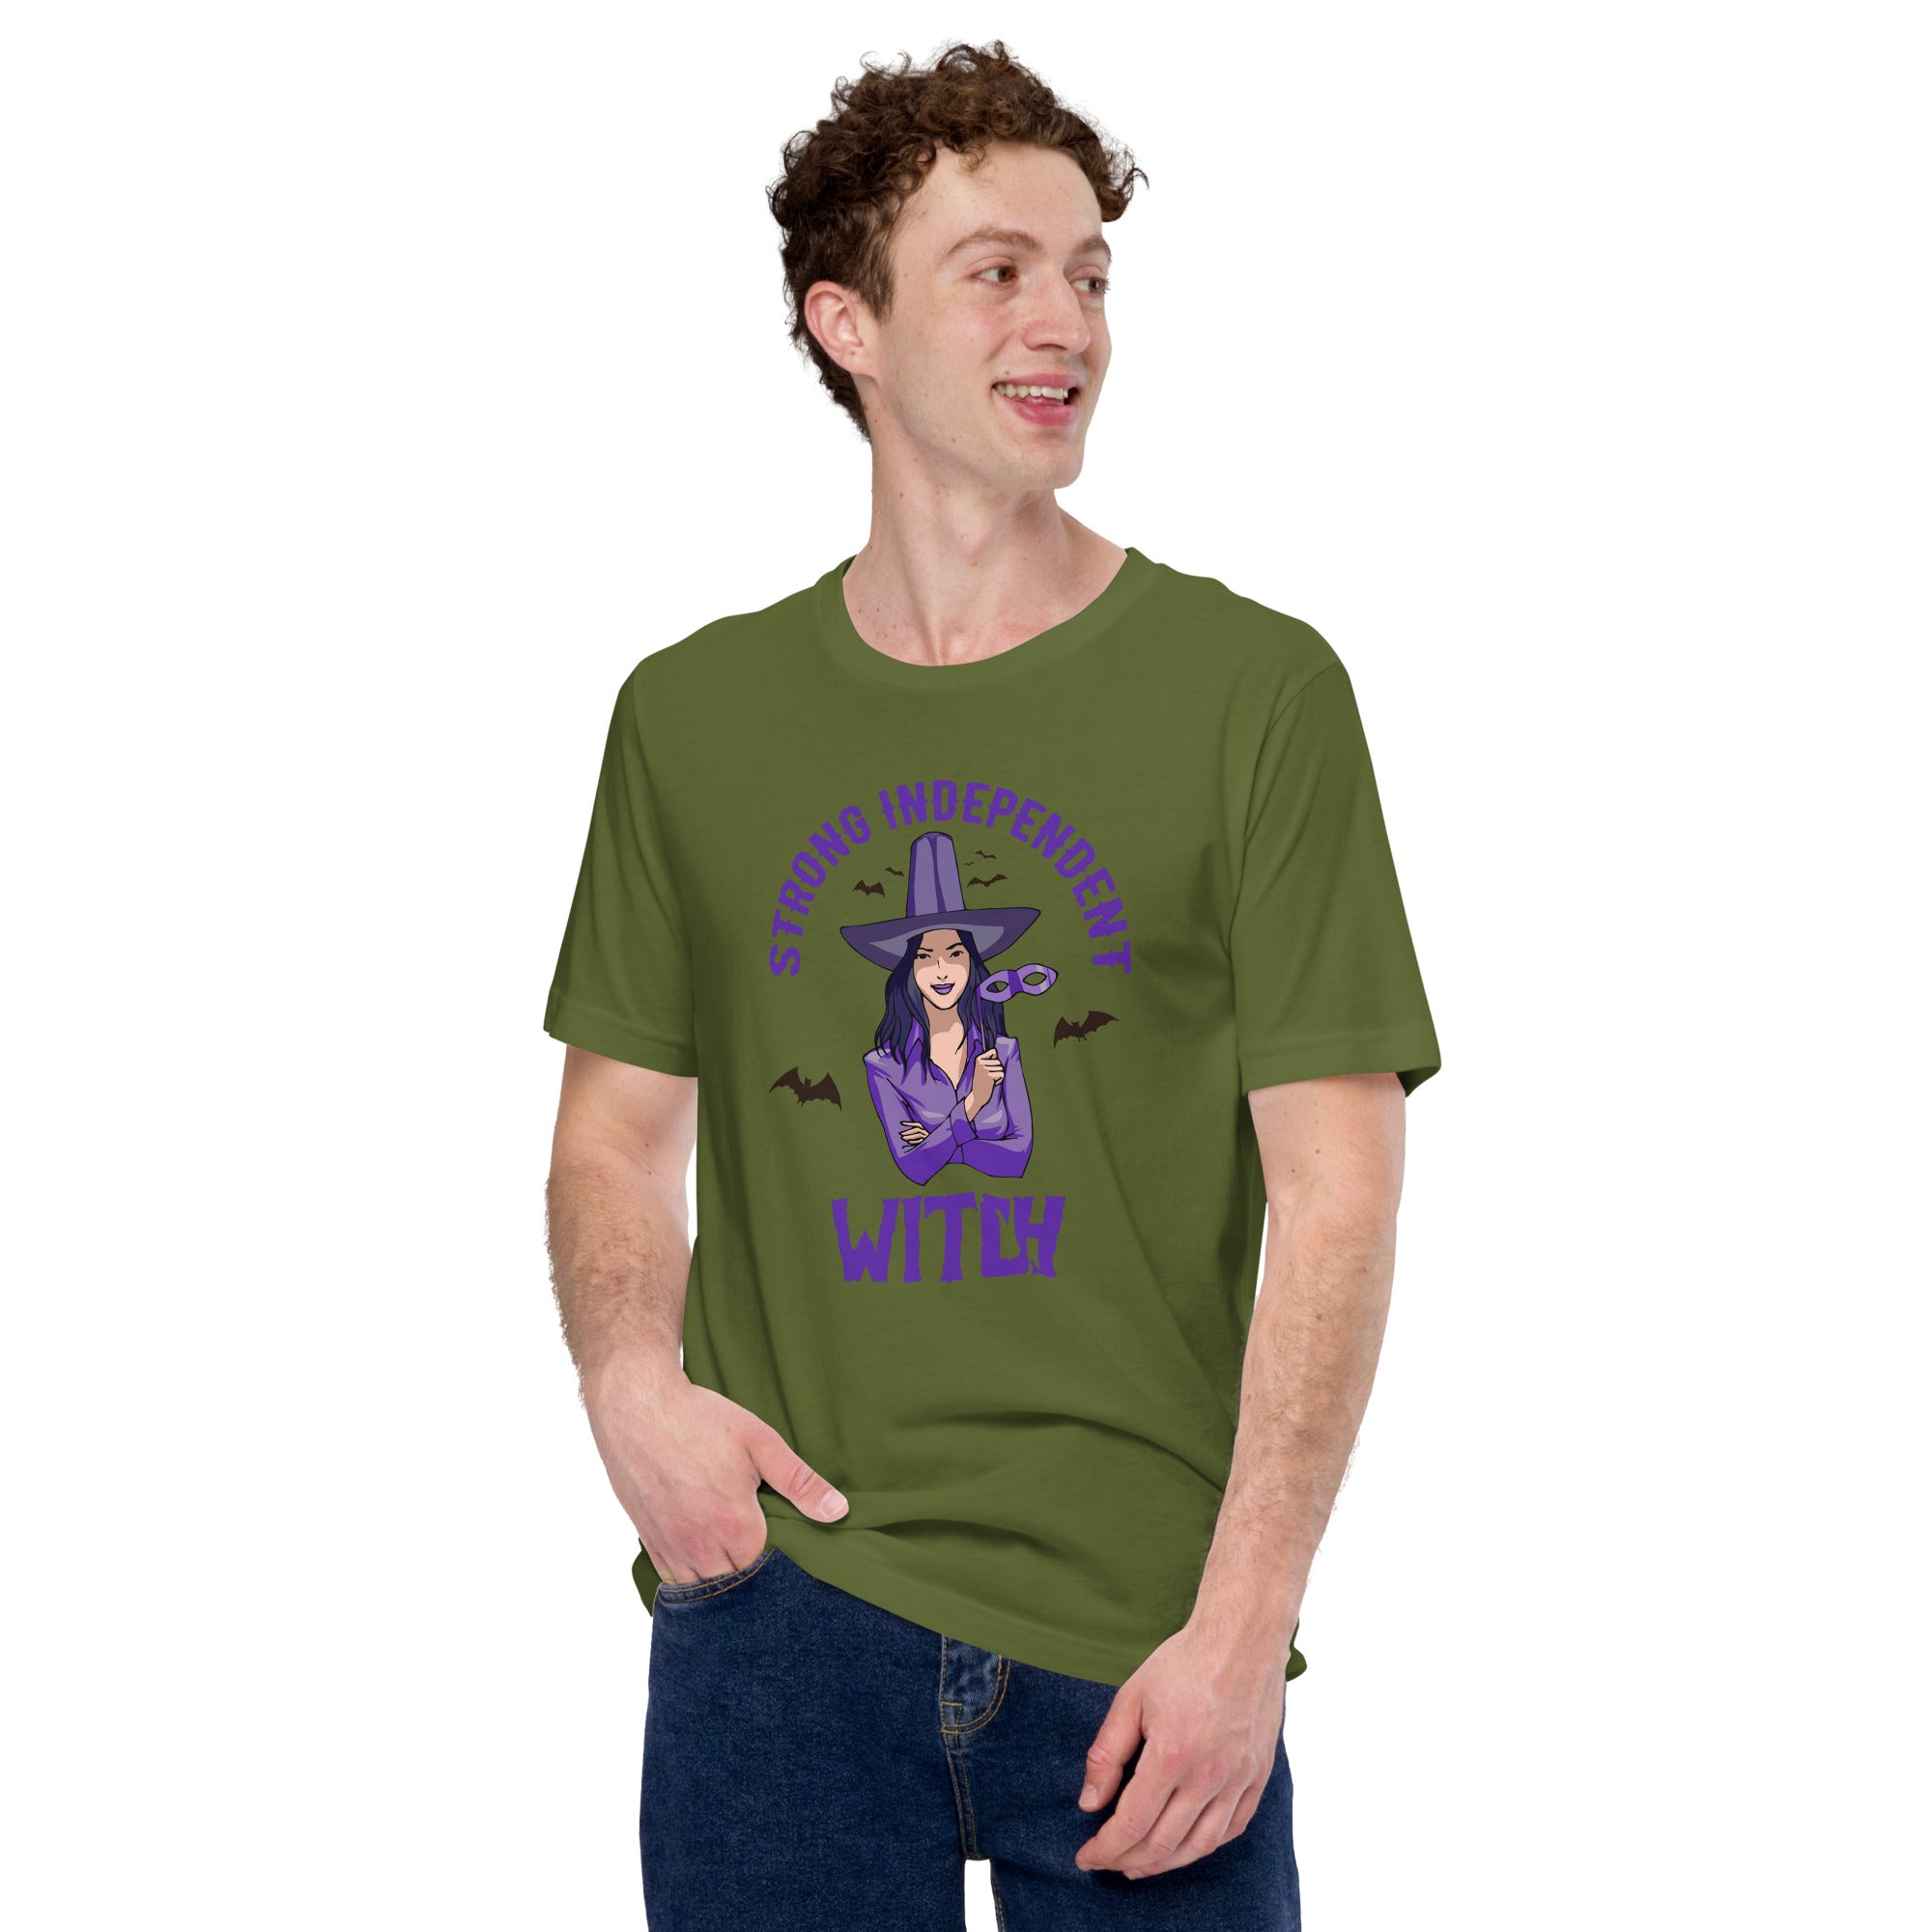 Strong Independent WitchUnisex t-shirt